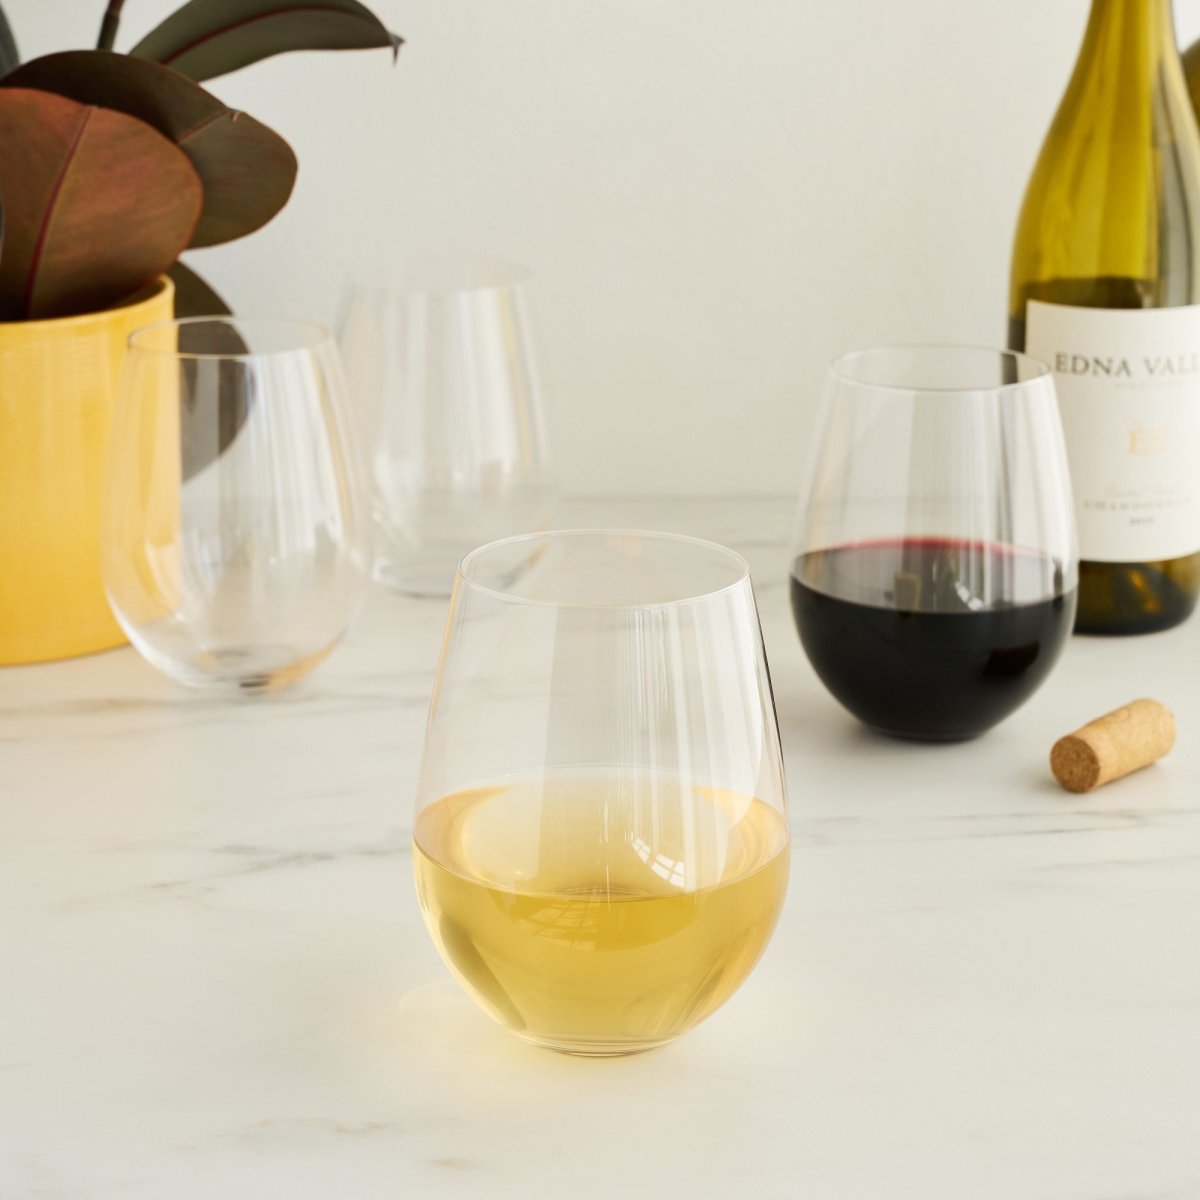 Ello Products - Weekend ready! Our top-selling Cru stemless wine glasses  are going fast. Grab your set and enjoy summer in style.  wine-glass